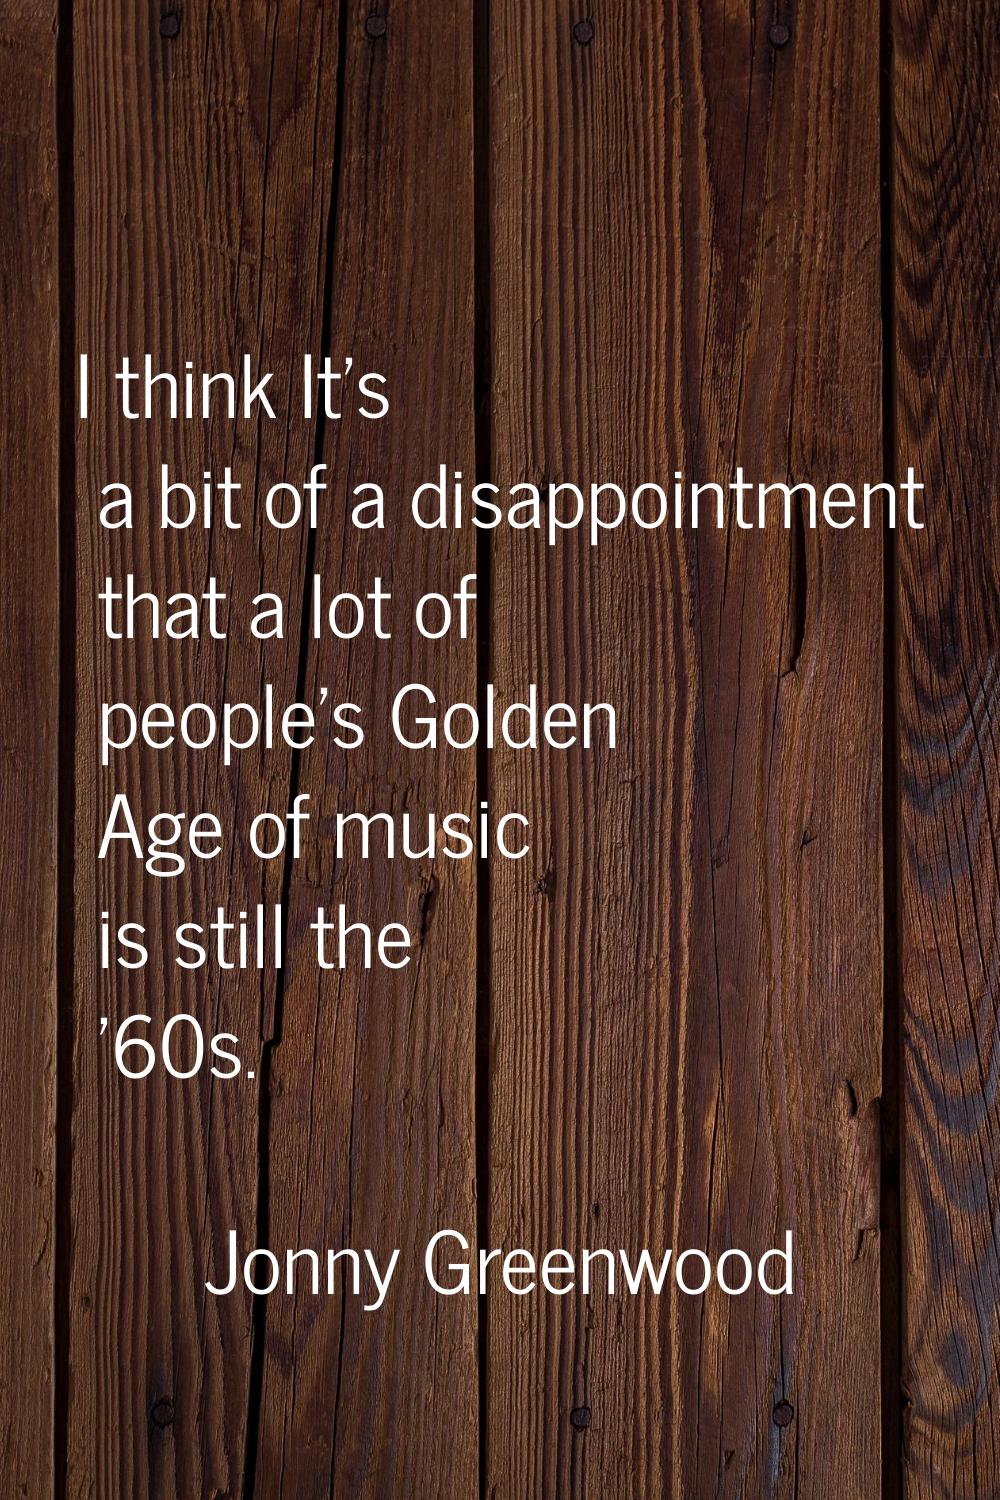 I think It's a bit of a disappointment that a lot of people's Golden Age of music is still the '60s